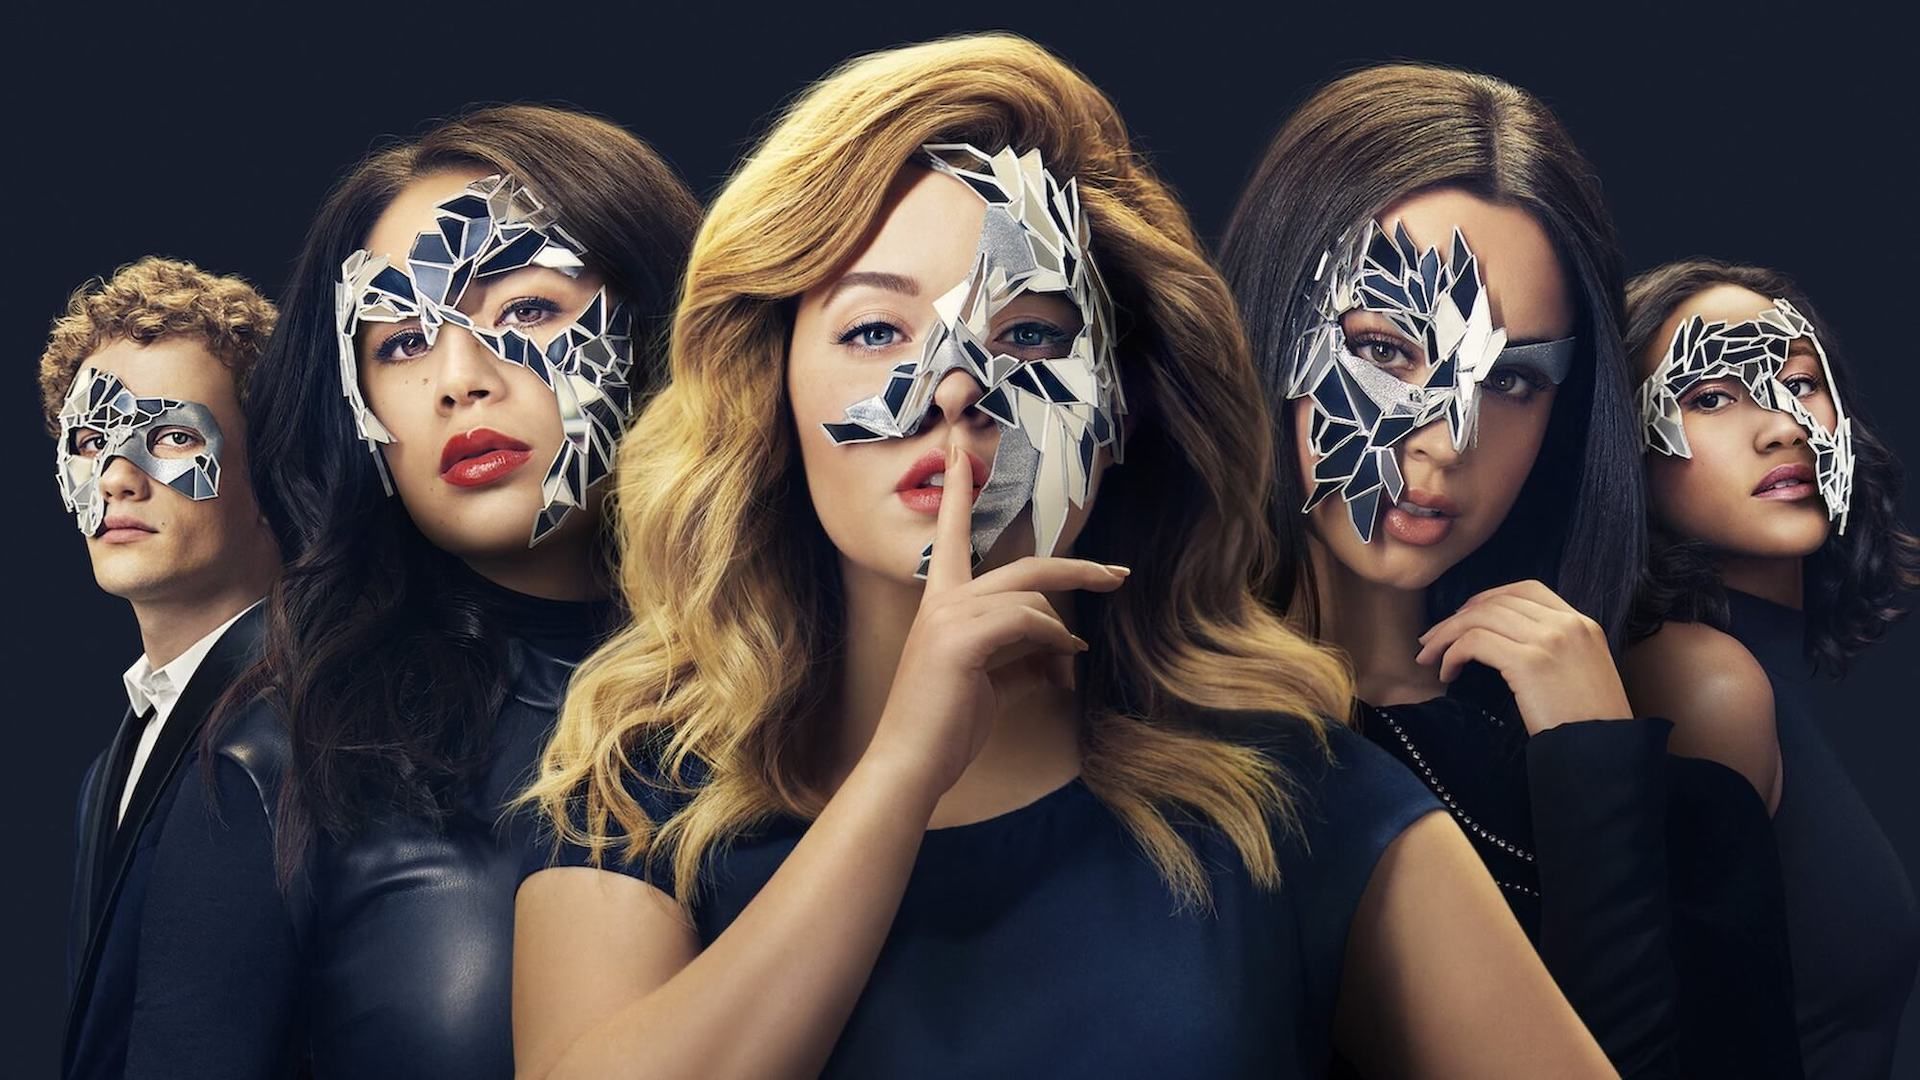 Pretty Little Liars: The Perfectionists background